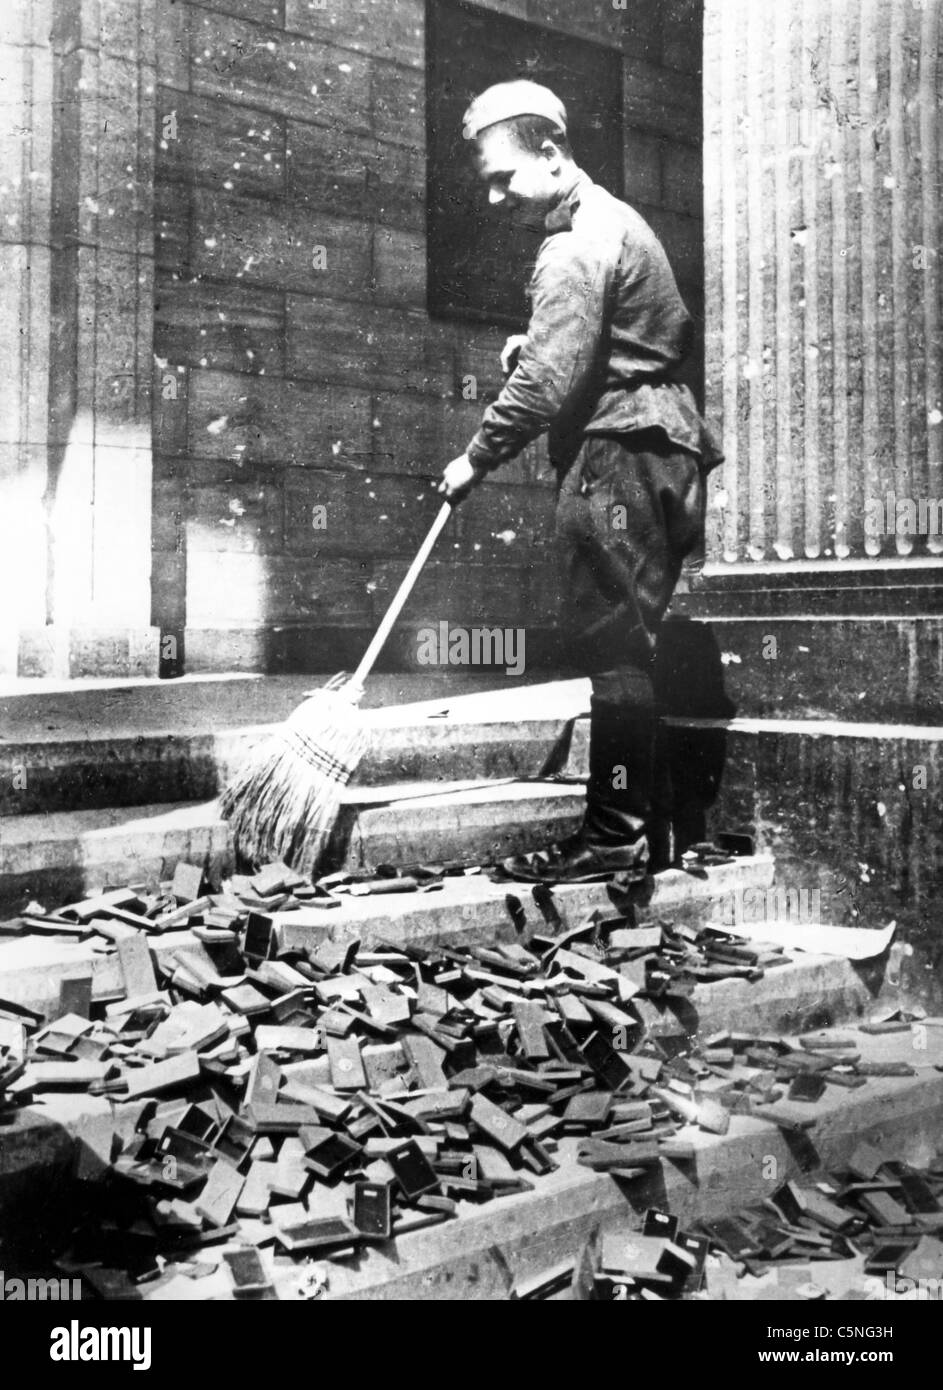 Russian soldier cleans Nazi propaganda material, the Reichstag, Berlin, Germany, World War II, 1945 Stock Photo